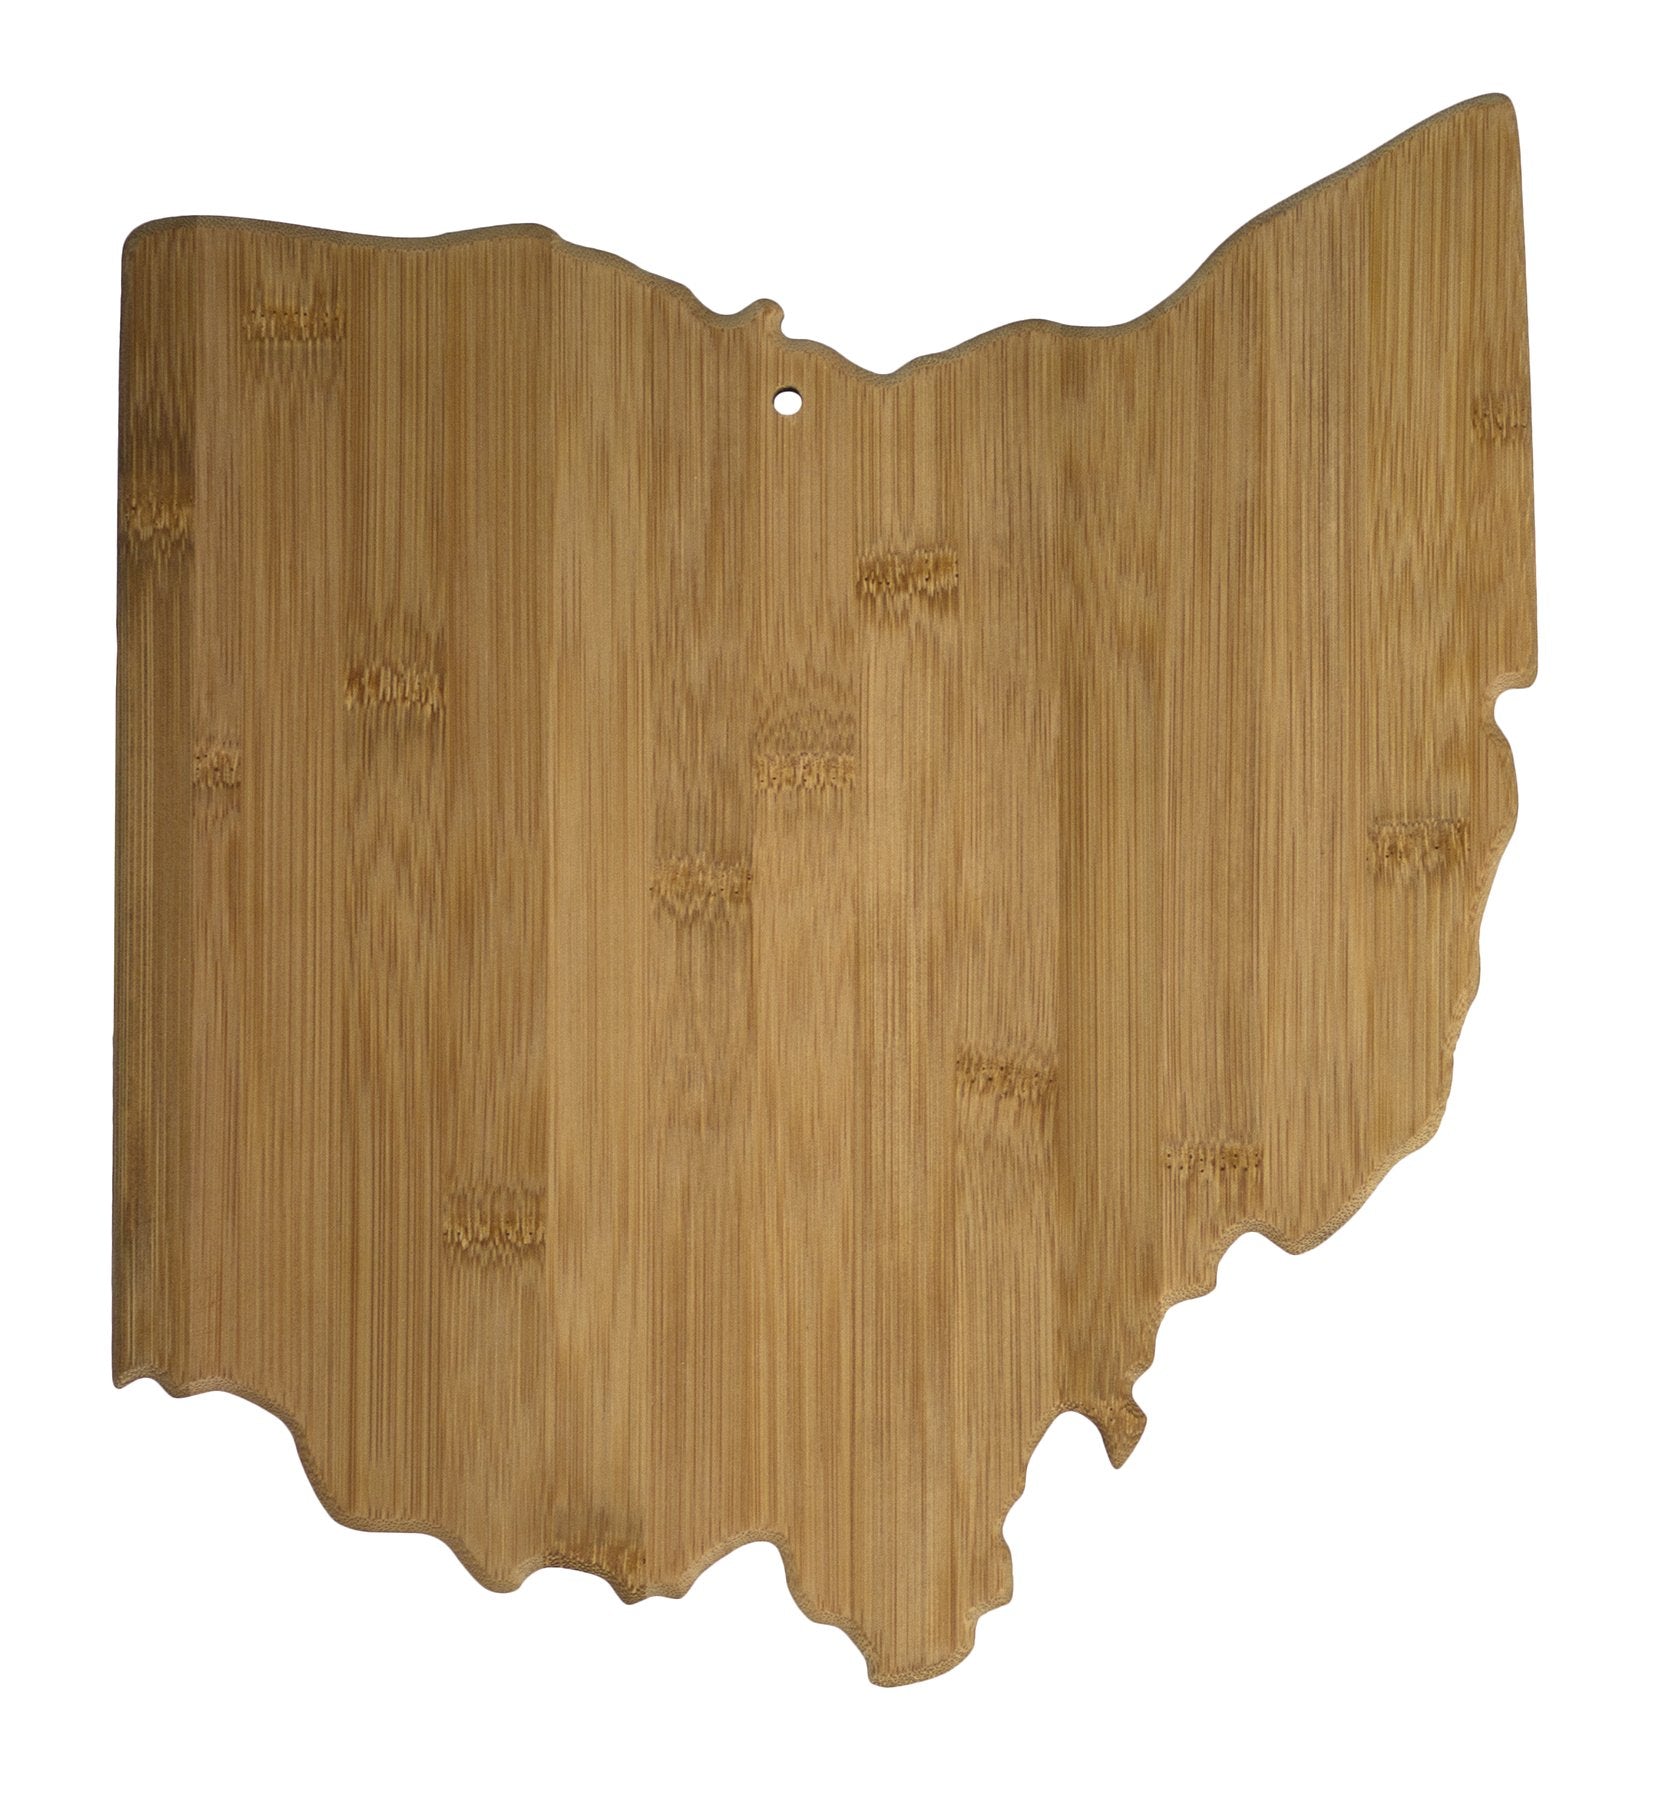 Ohio Serving and Cutting Board - Bamboo